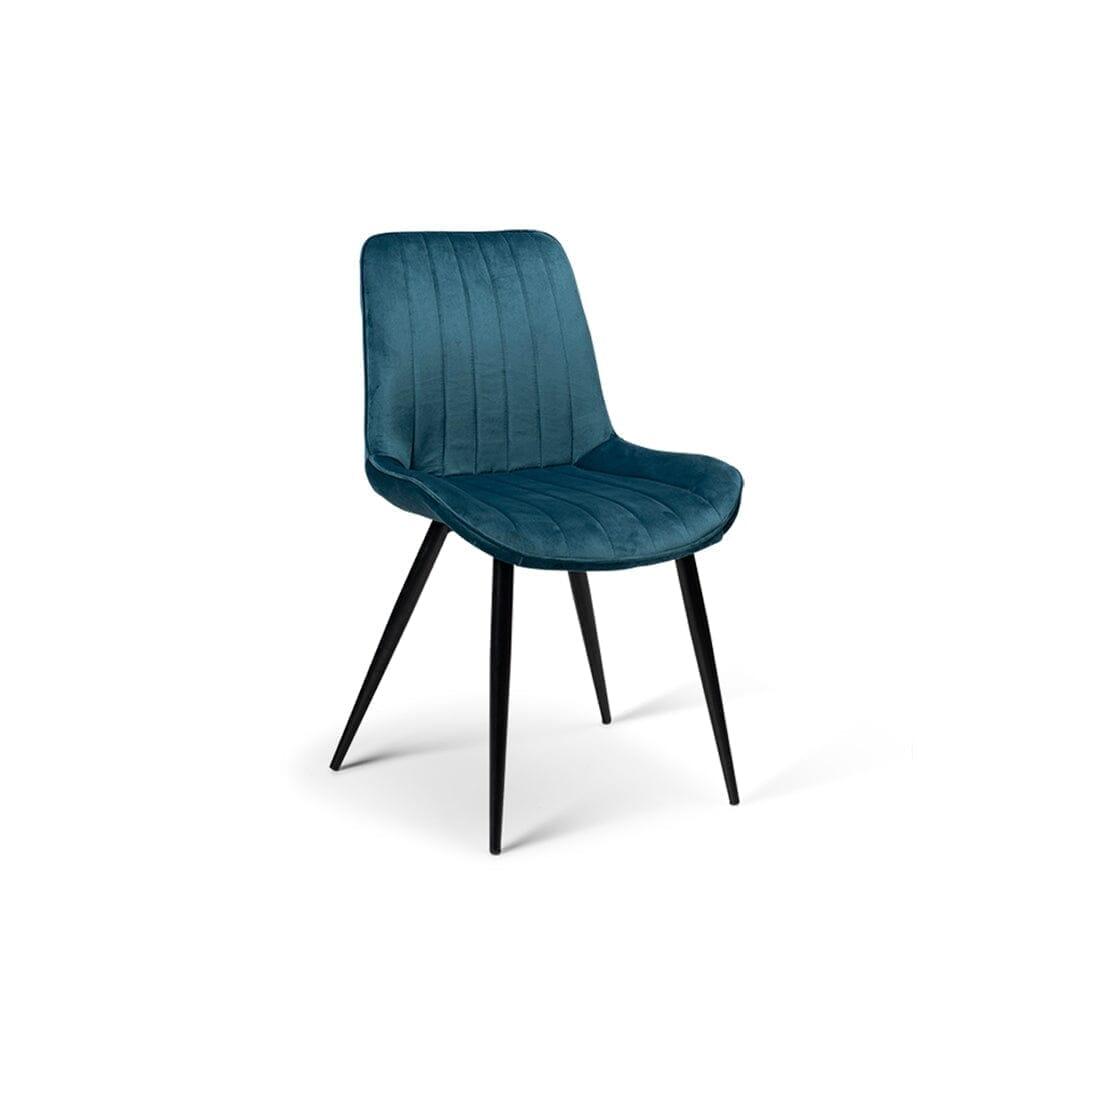 Atlas Glass Table - 6 Seater - Bella Teal Dining Chairs with Black Legs - Laura James